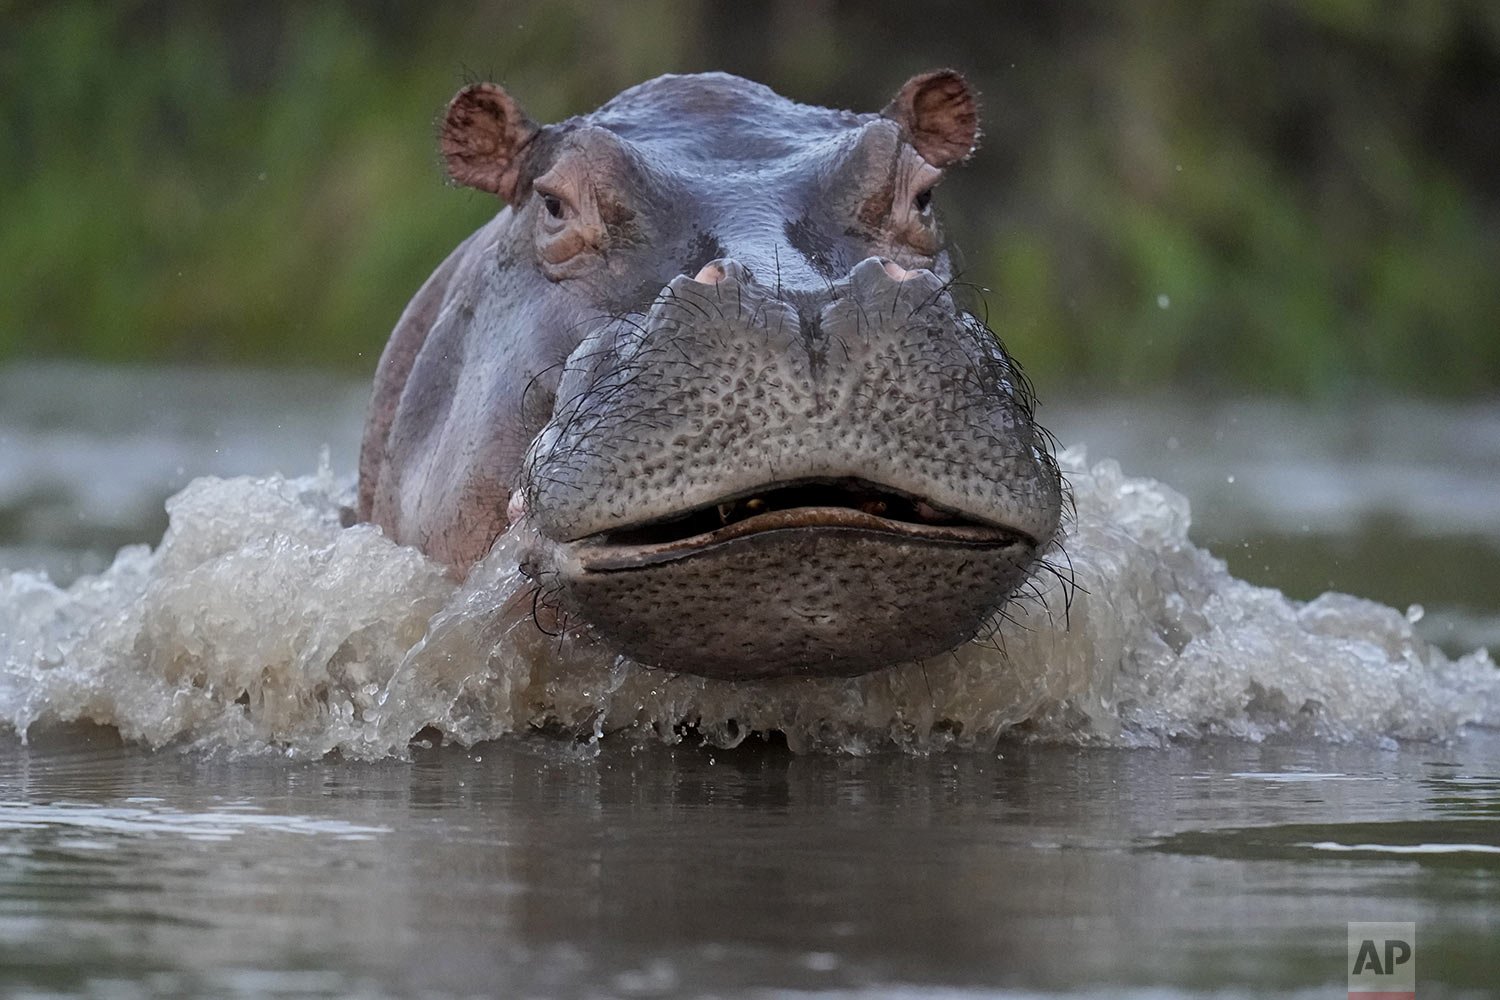  A hippo swims in the Magdalena River in Puerto Triunfo, Colombia, Feb. 16, 2022. Colombia's Environment Ministry announced in early Feb. that hippos are an invasive species, in response to a lawsuit against the government over whether to kill or ste